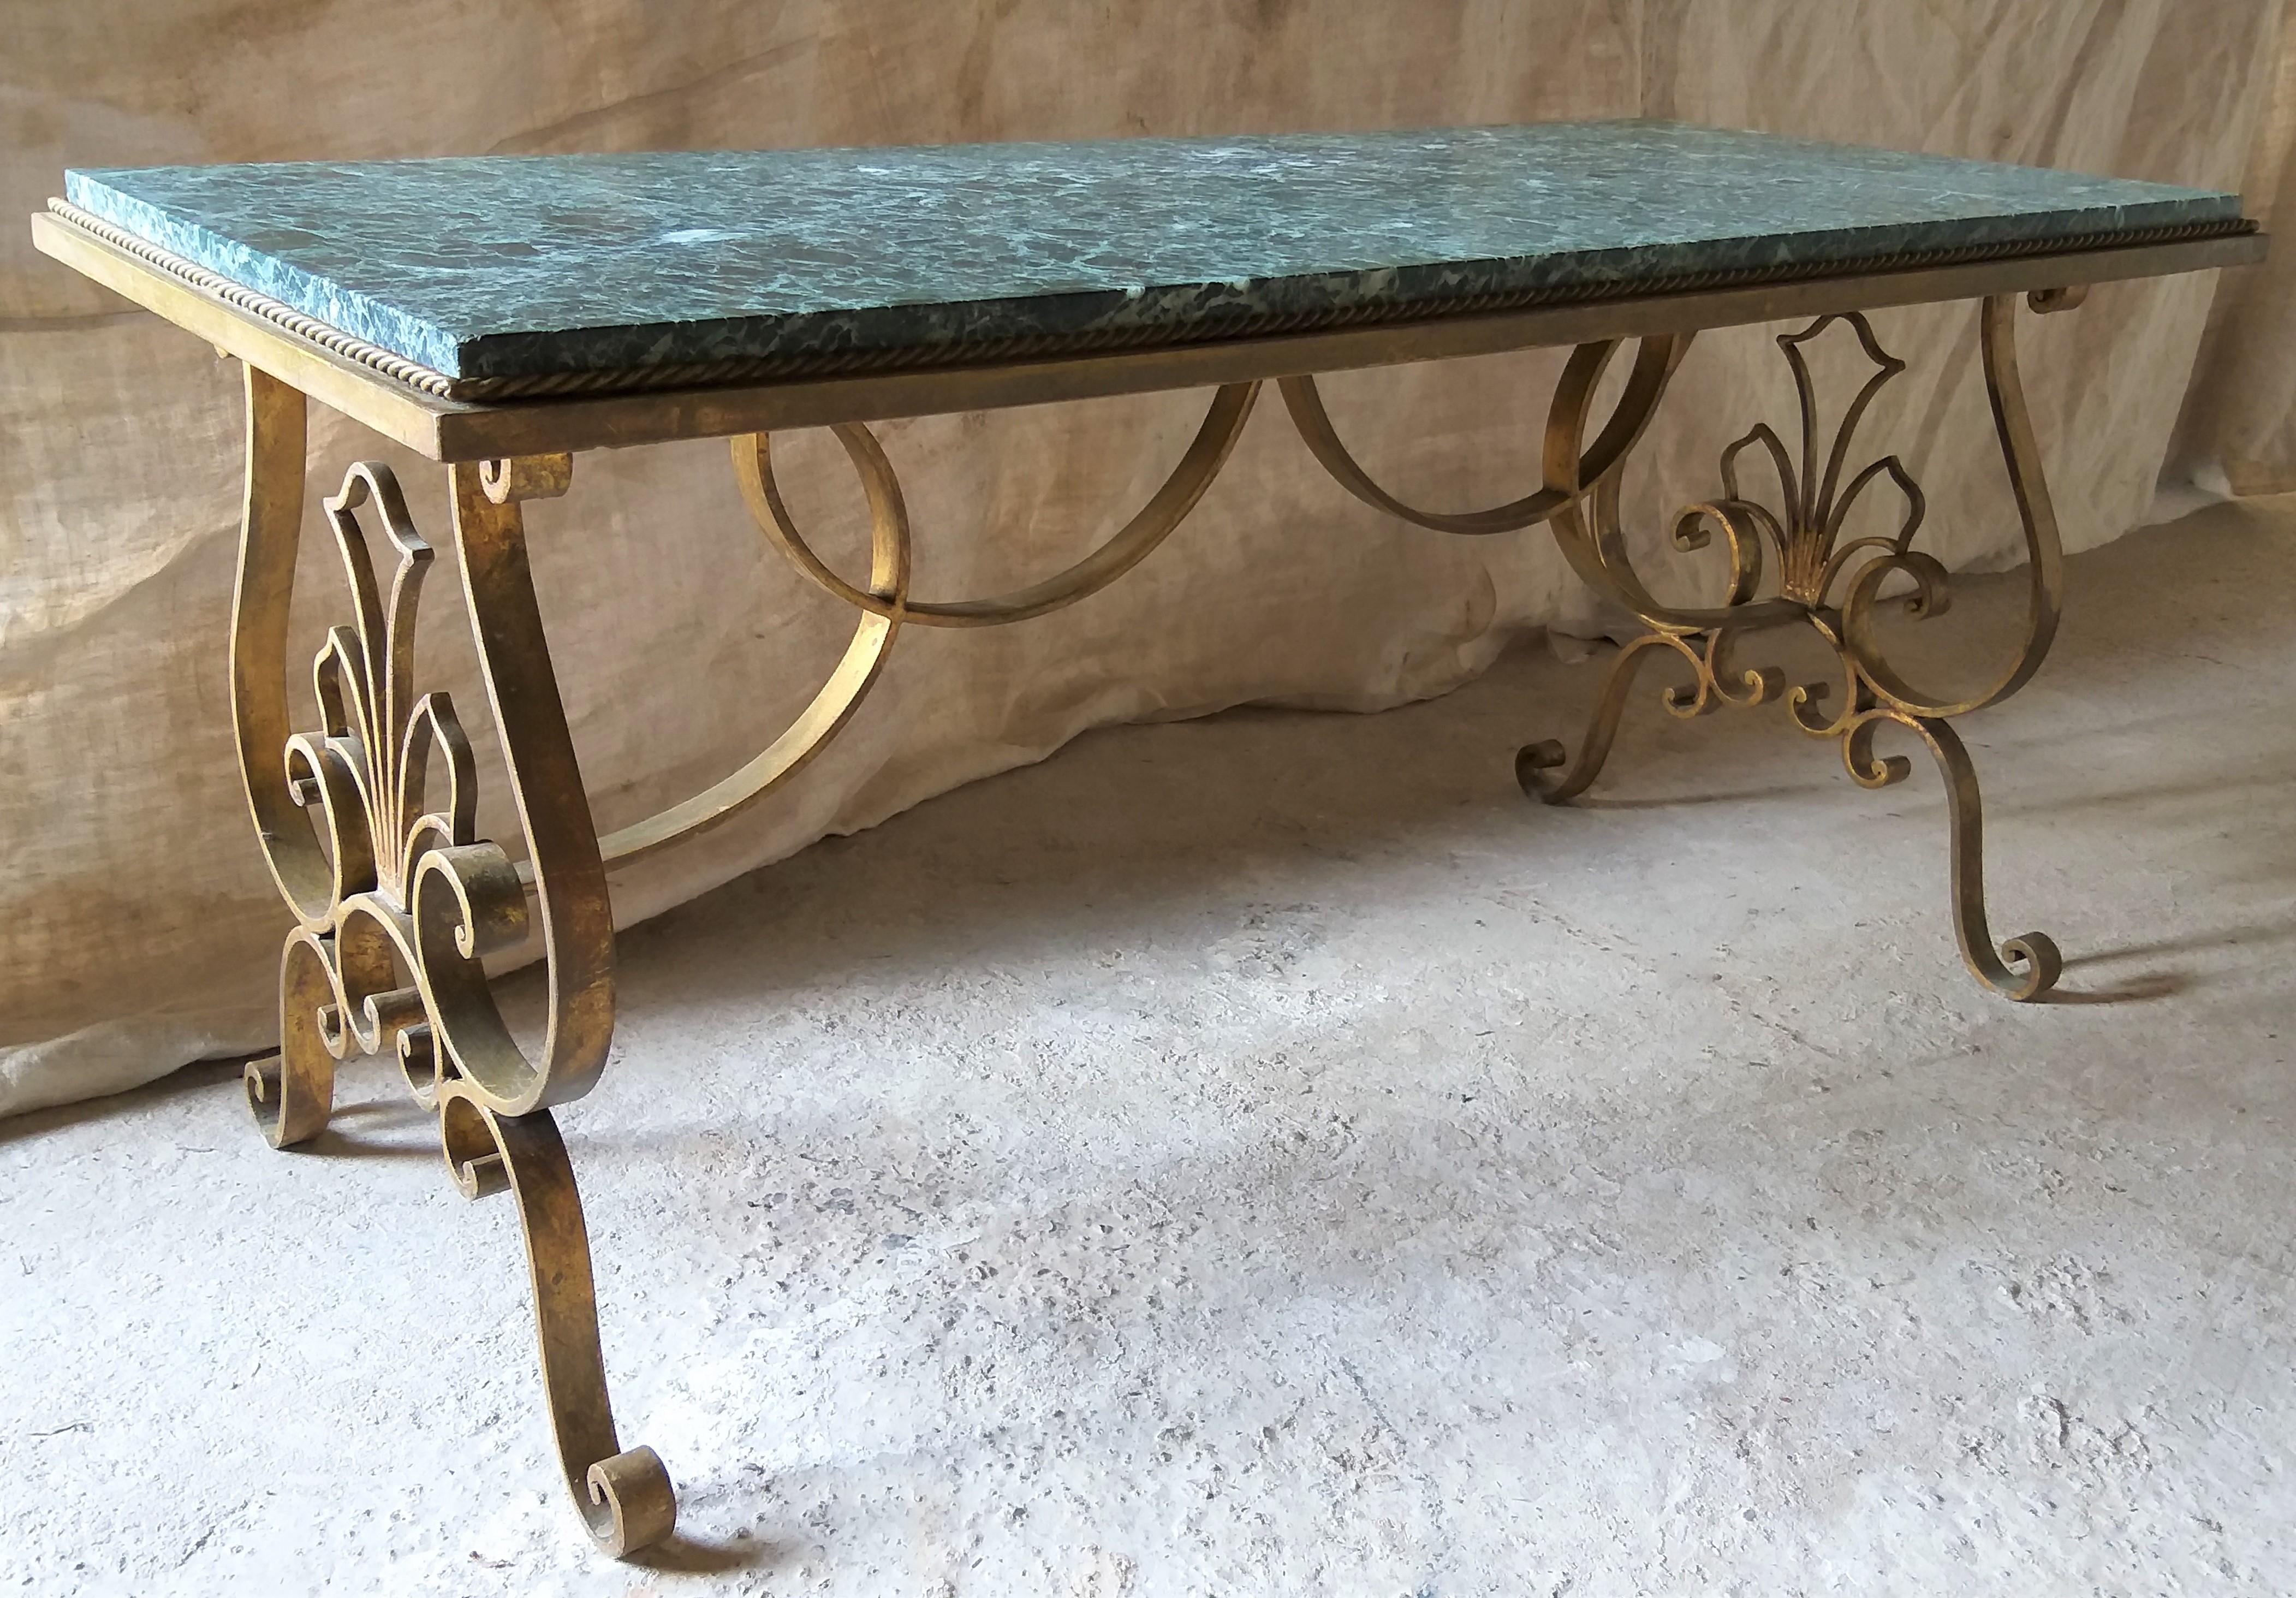 Rectangular coffee/cocktail salon table with a vibrant, vivid green 'Patricia Vert' marble top. On a beautiful gilt patined iron base.
Base and top has age appropriate wear, but absolutely in very good condition. Status Aparte has one similar table